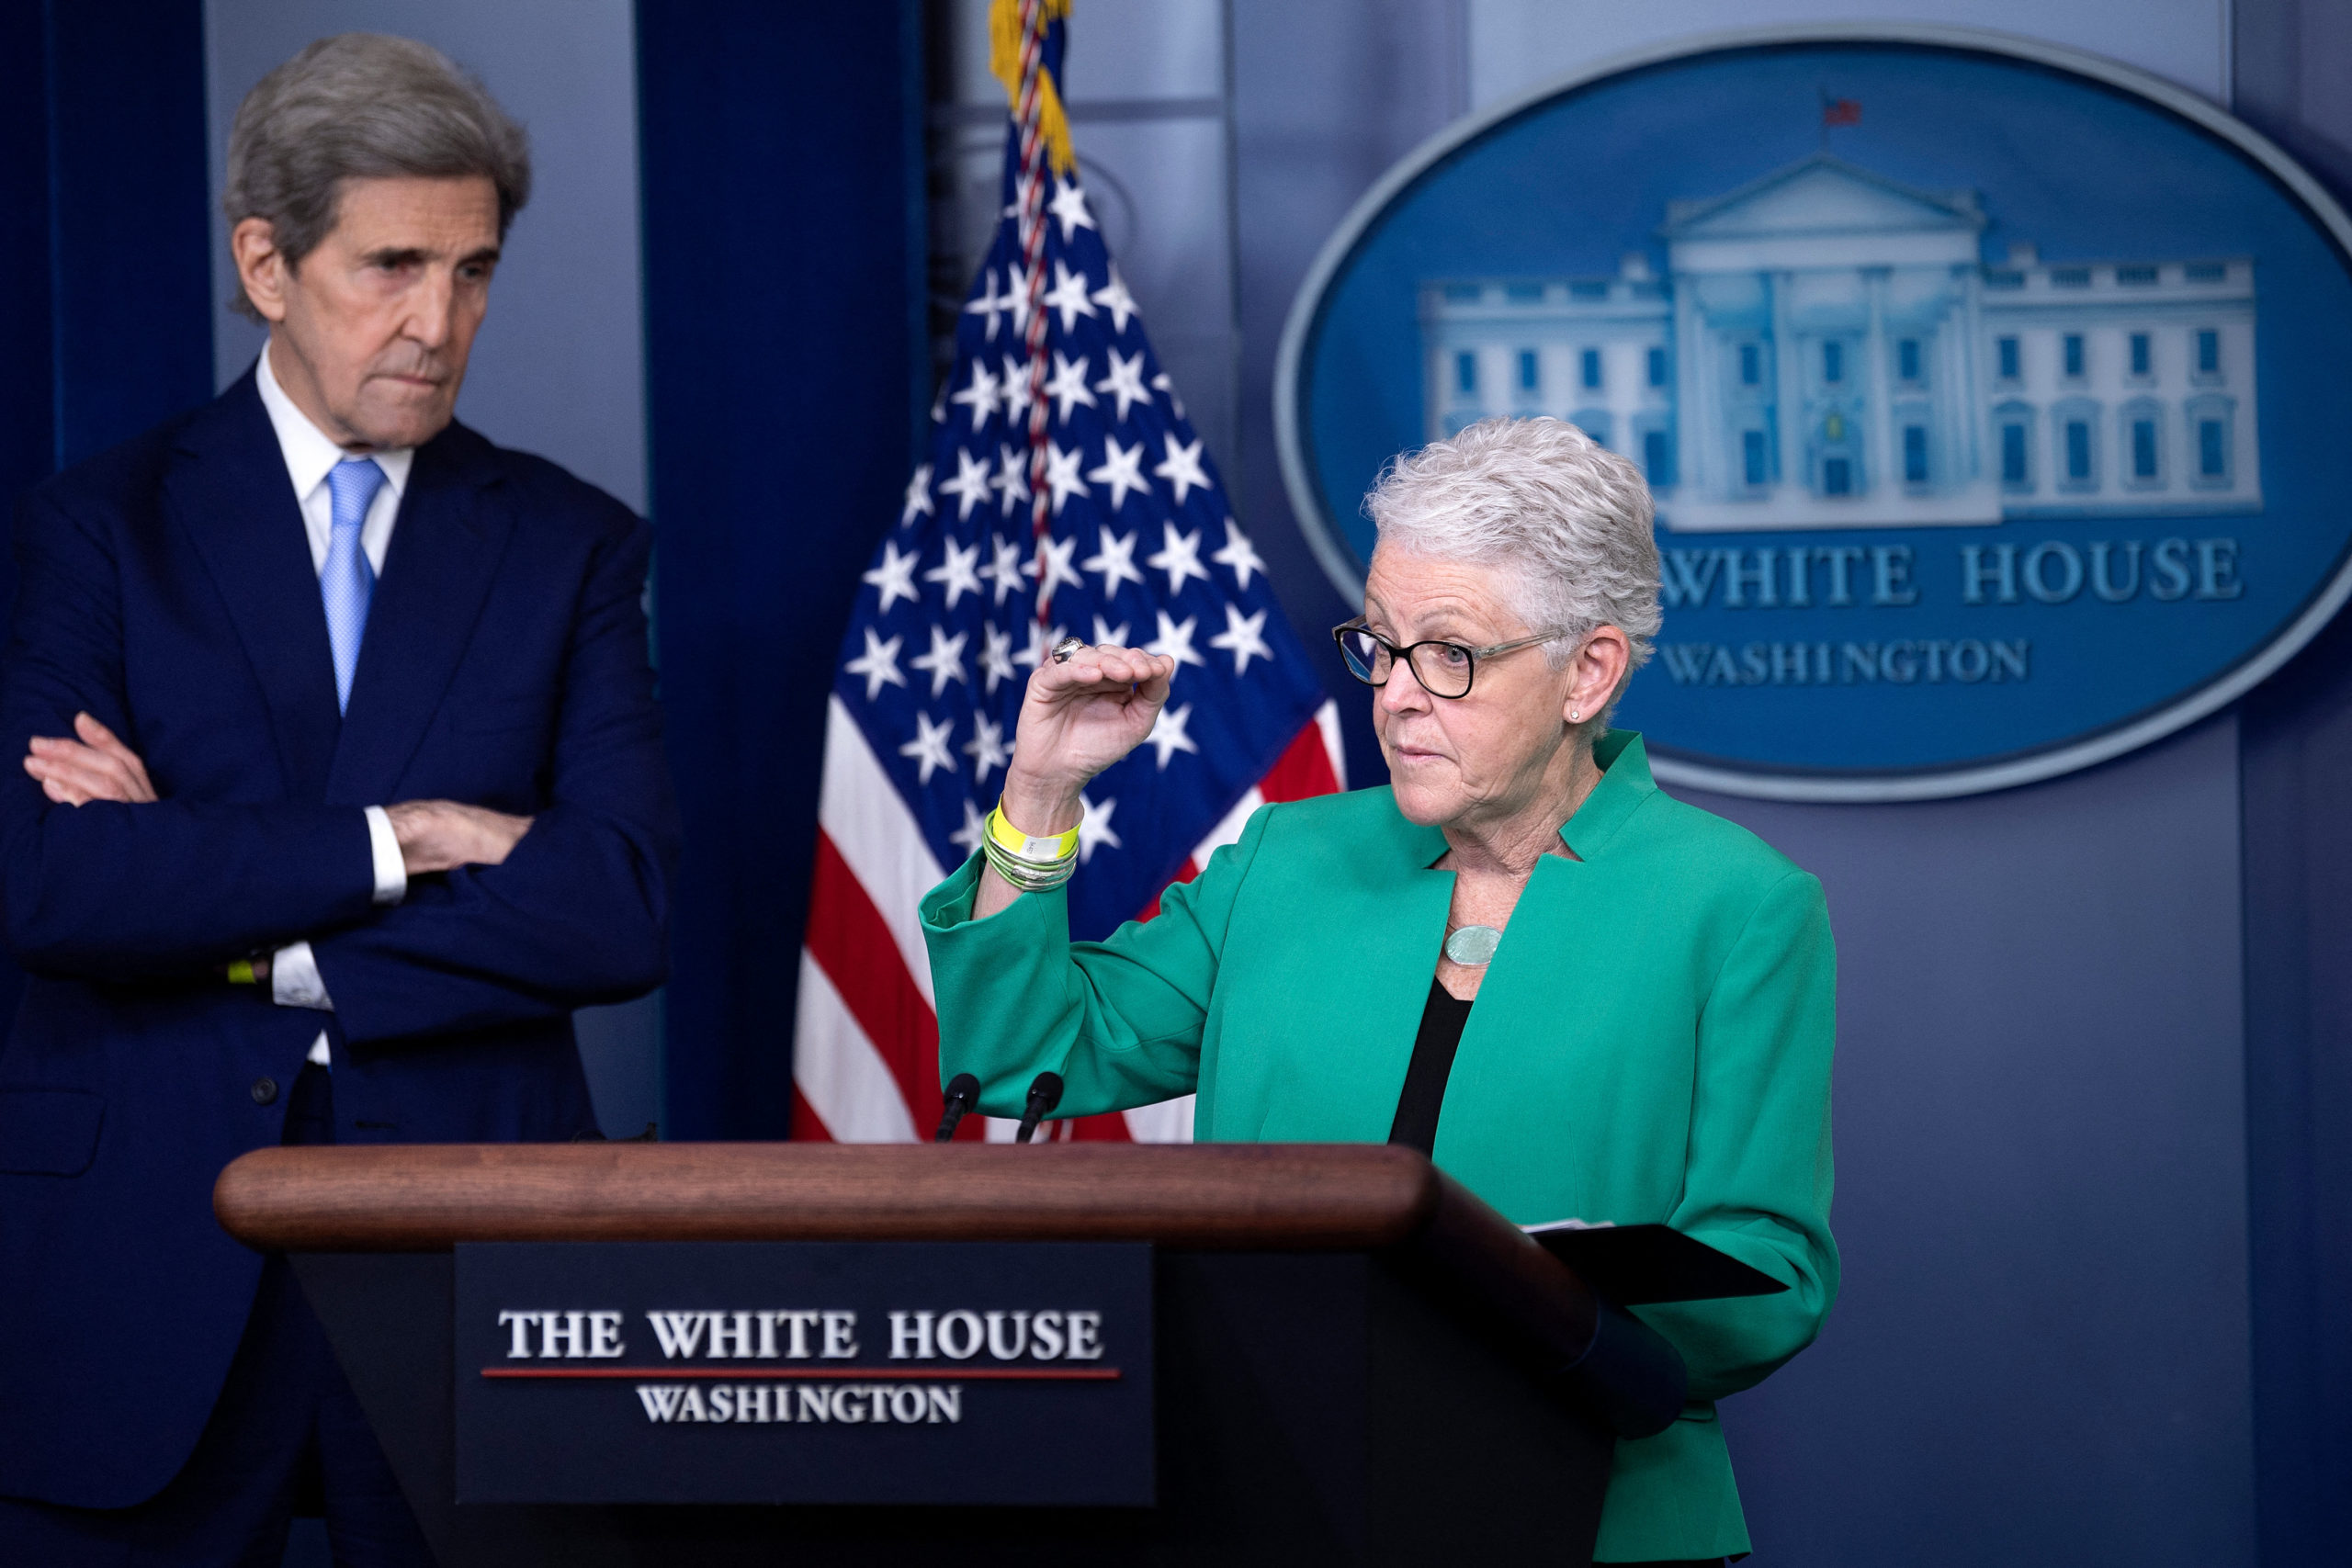 Climate Envoy John Kerry listens while White House climate adviser Gina McCarthy speaks during a press briefing on April 22, 2021, in Washington, D.C. (Brendan Smialowski/AFP via Getty Images)